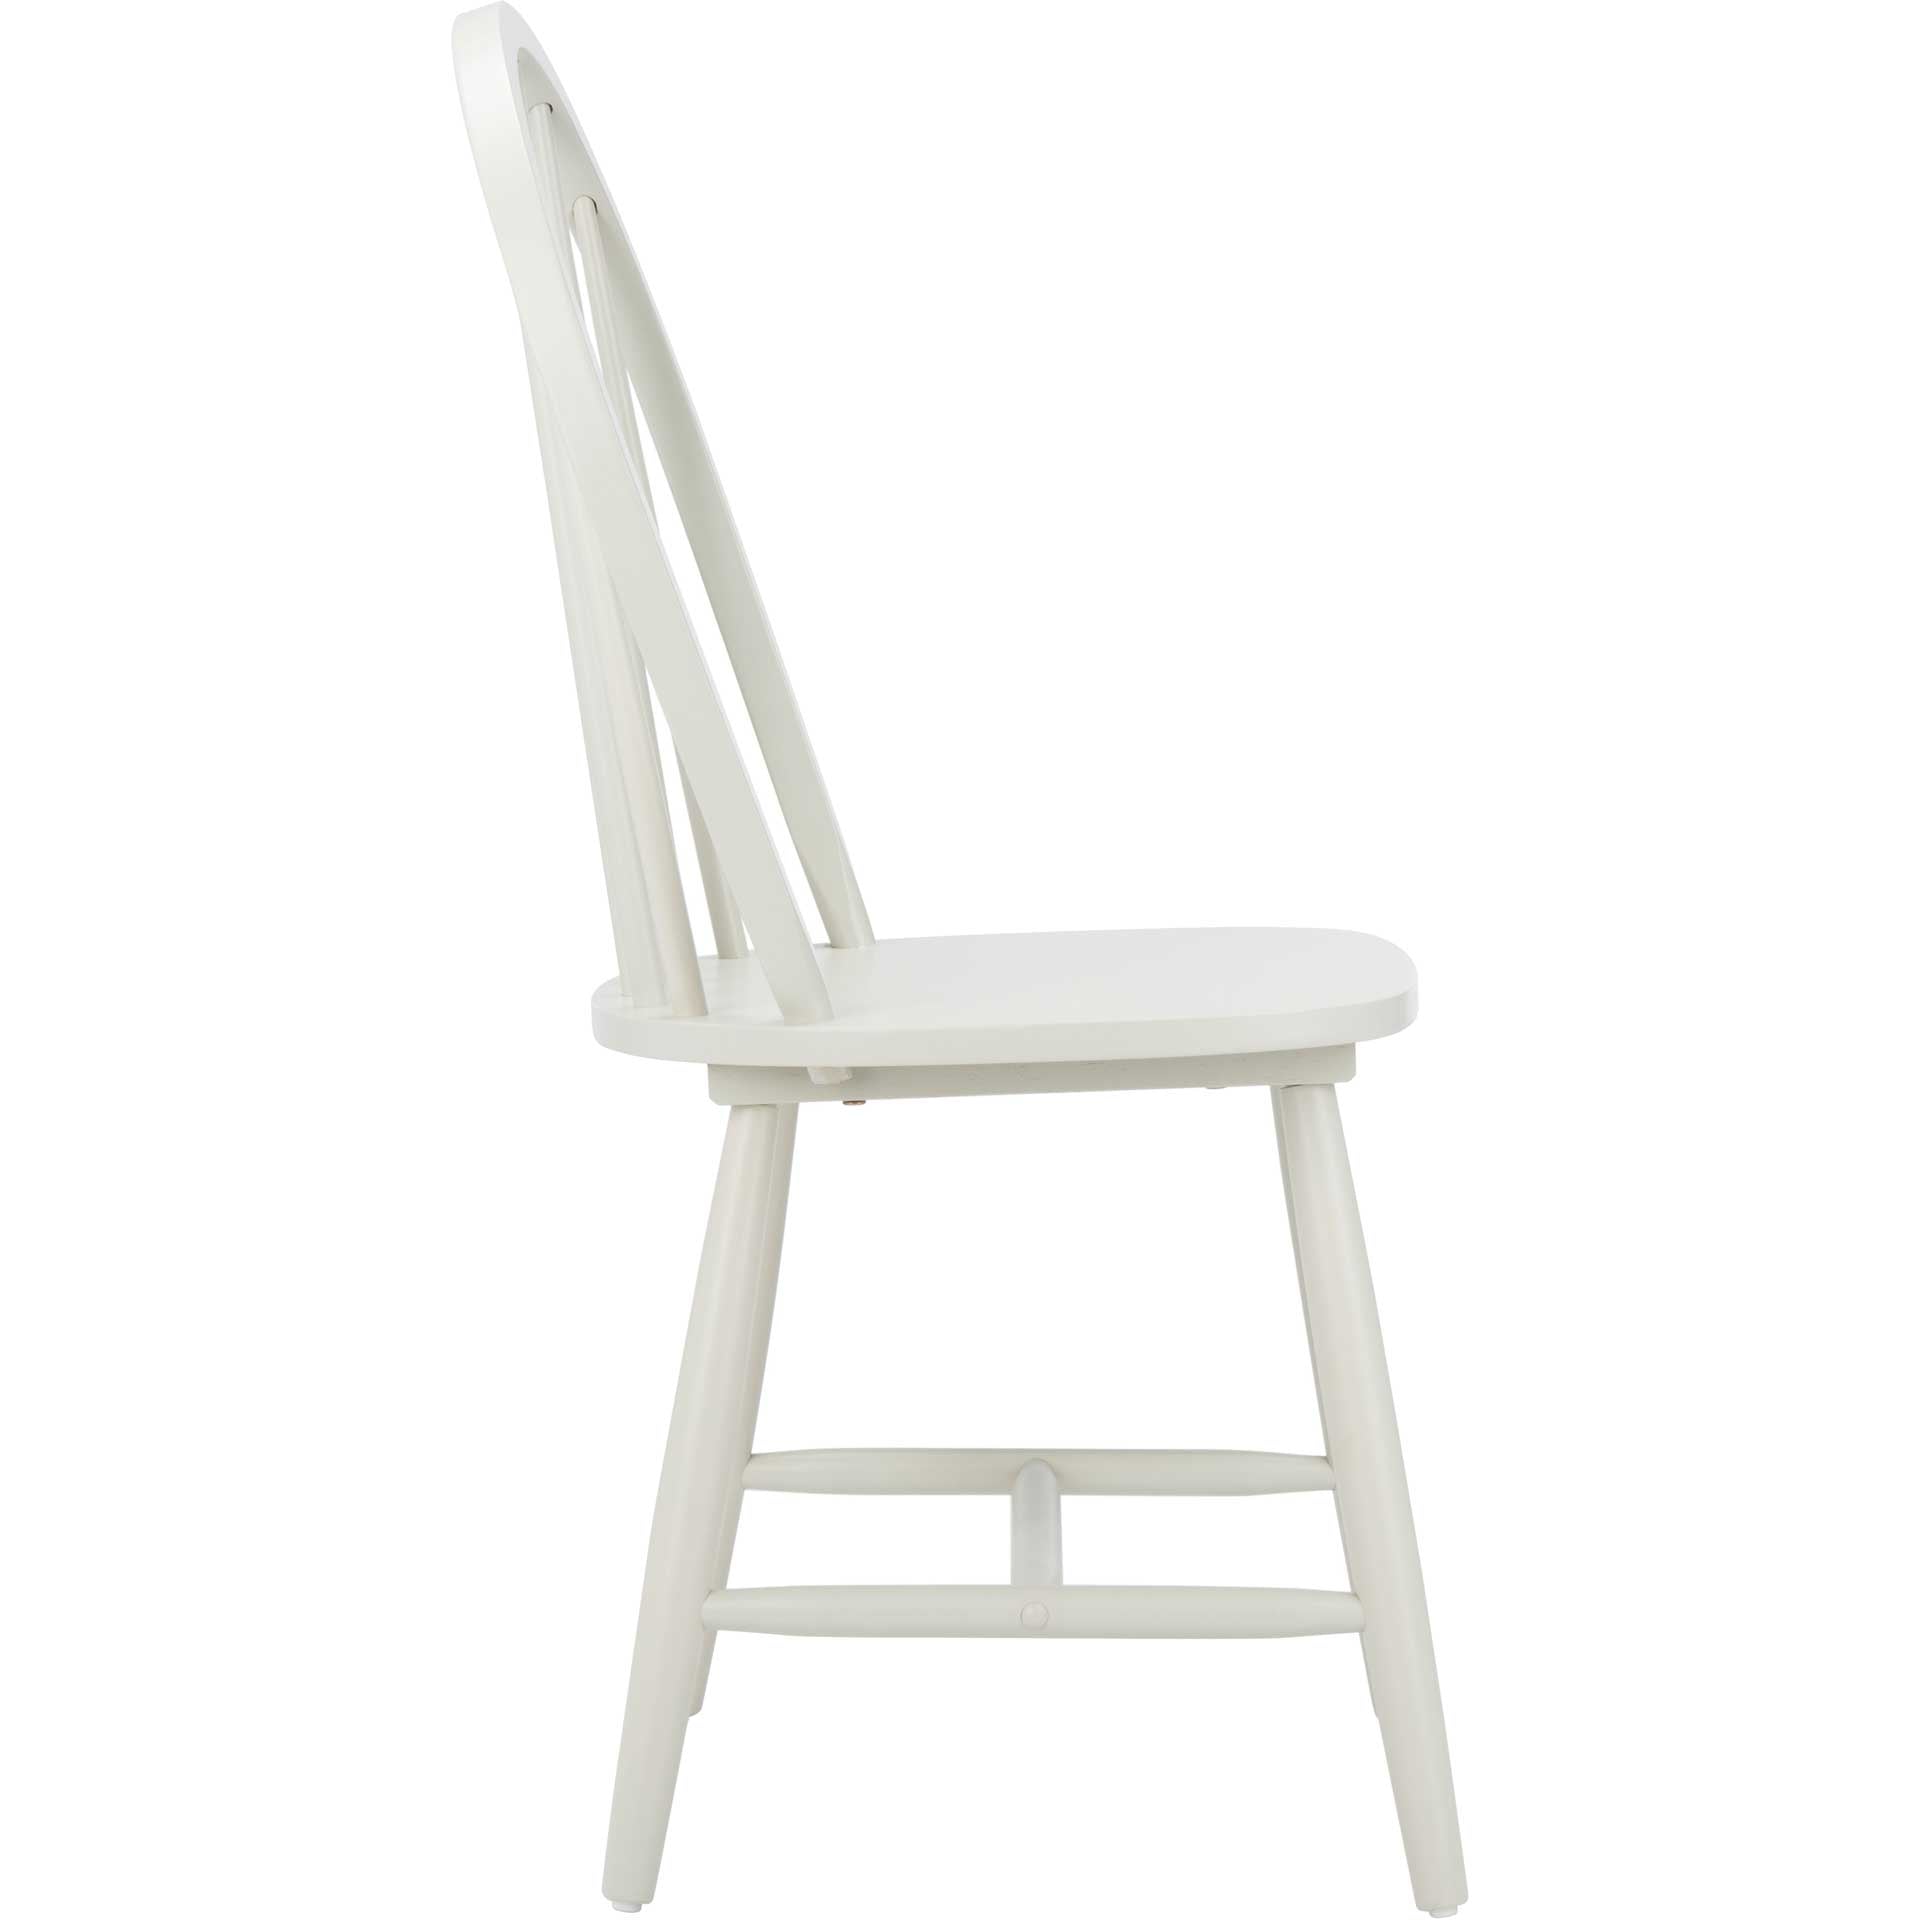 Calista Spindle Back Chair Off White (Set of 2)